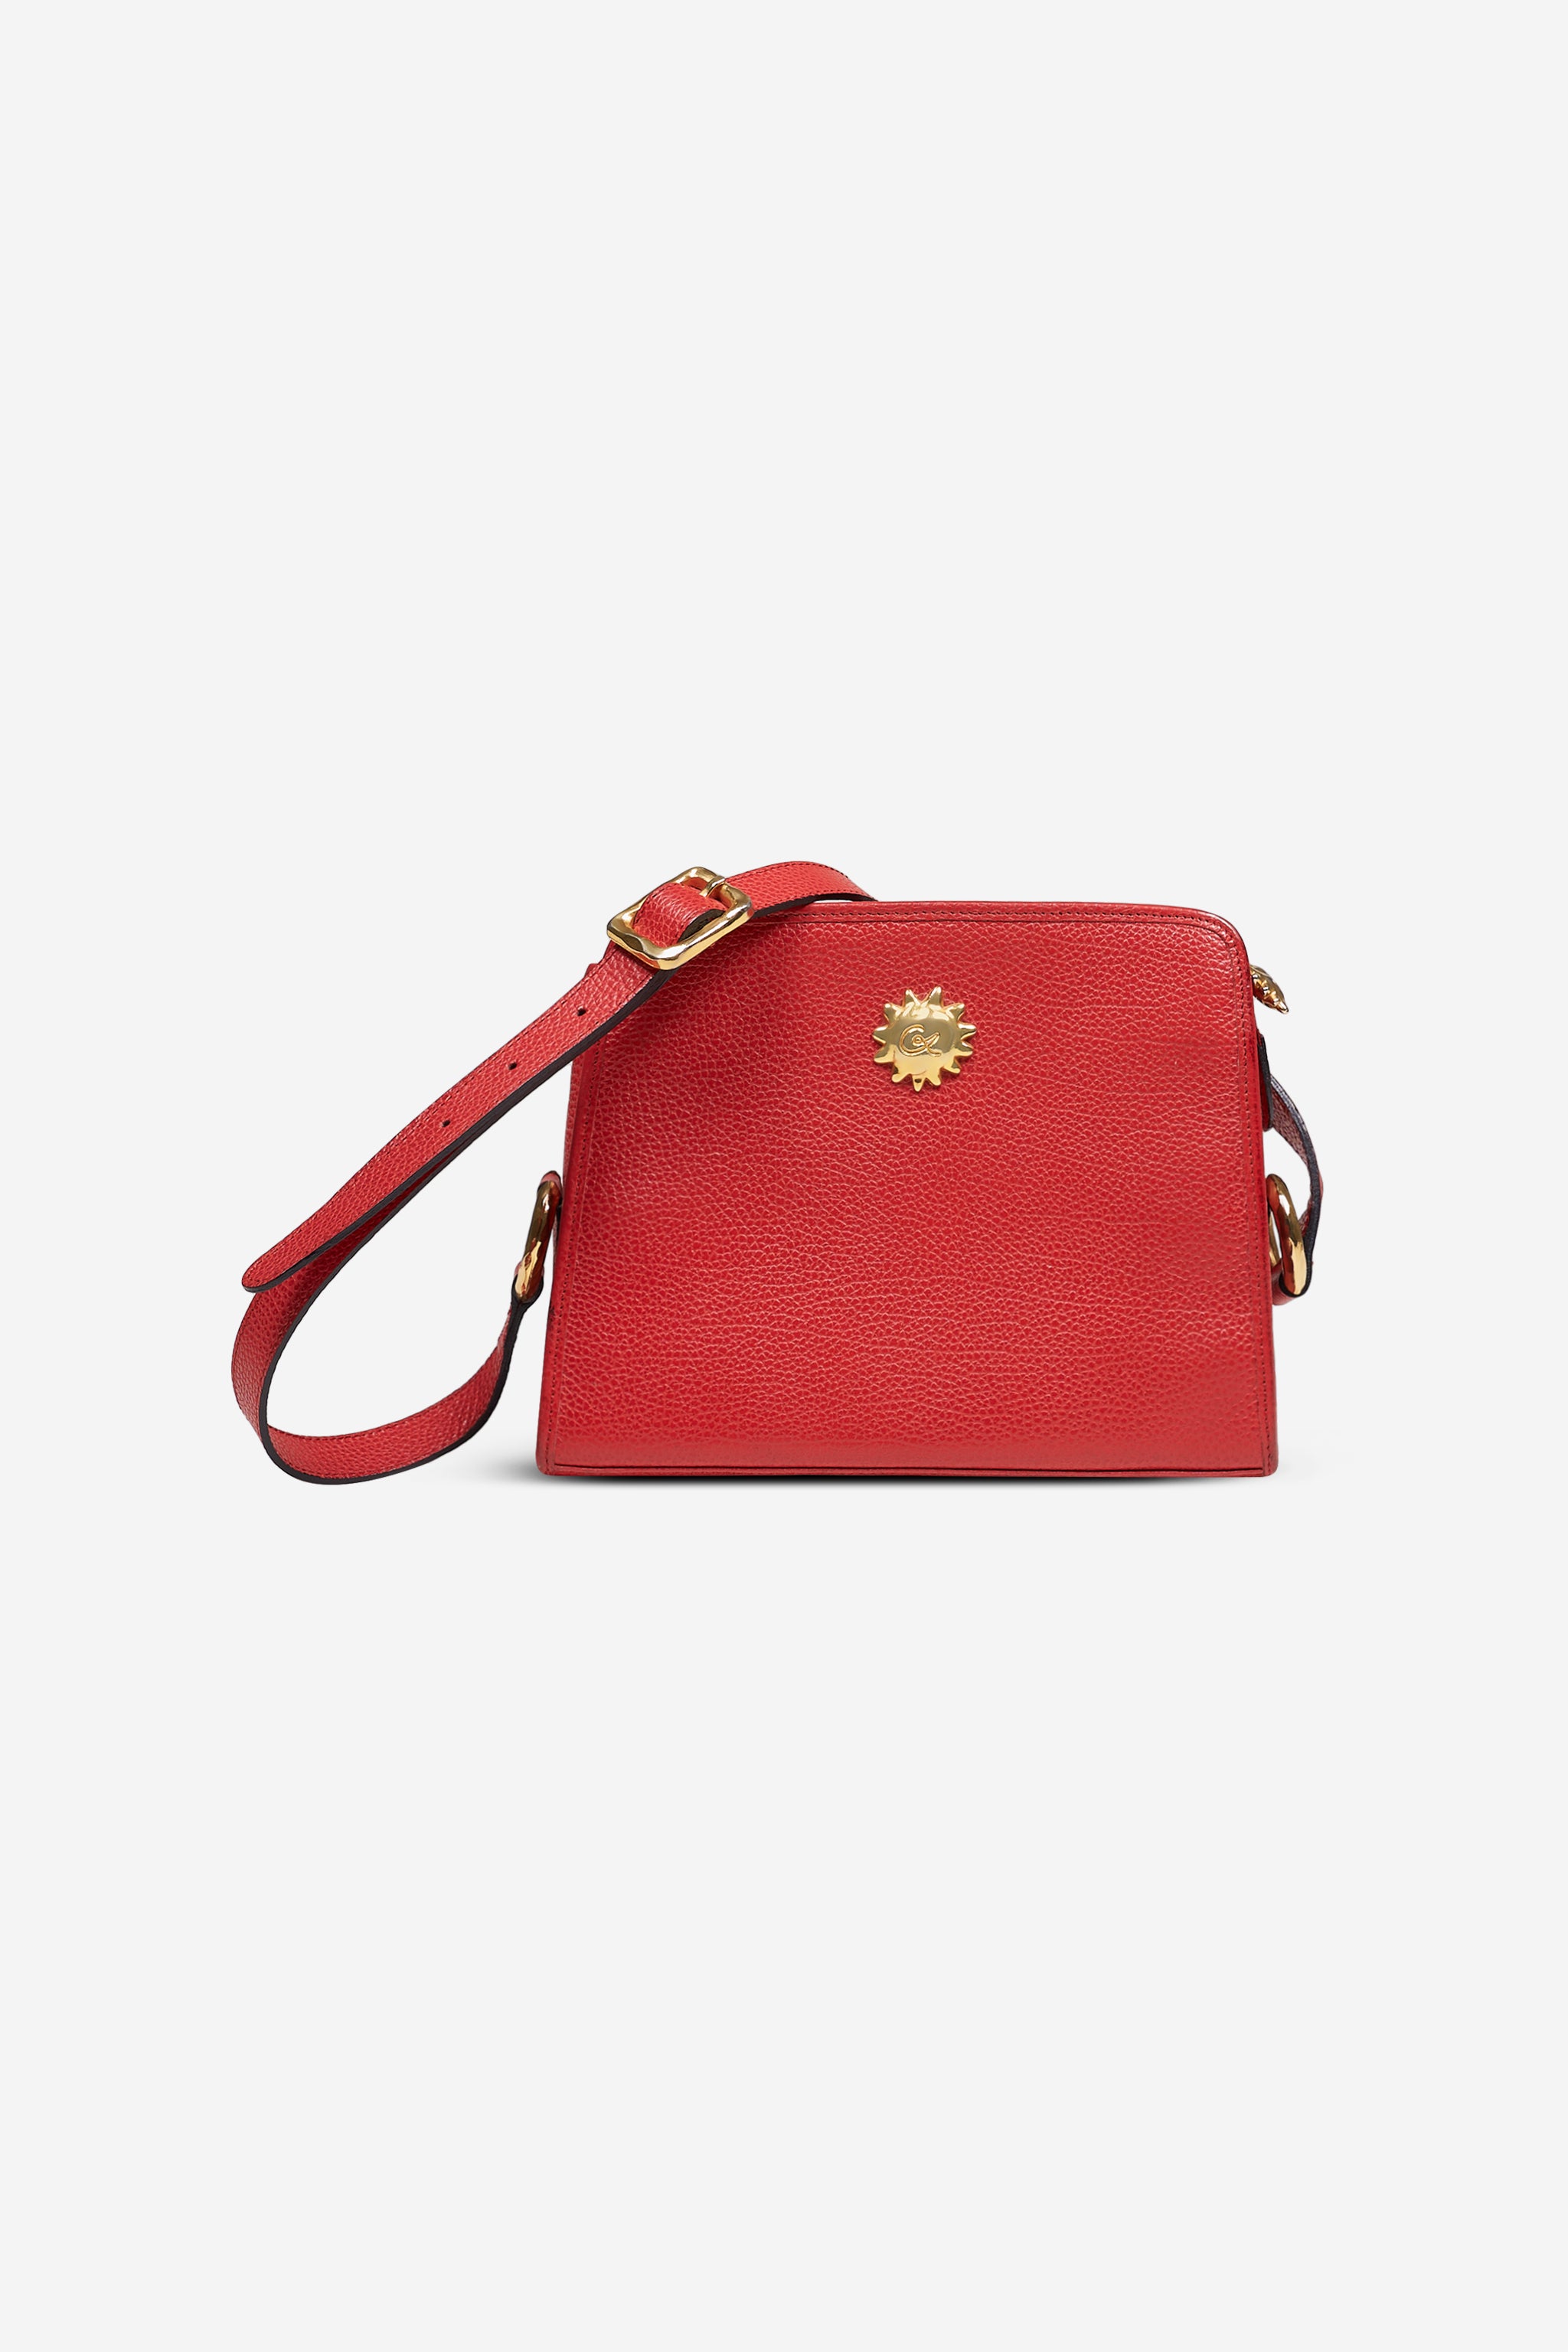 Christian Lacroix red bag